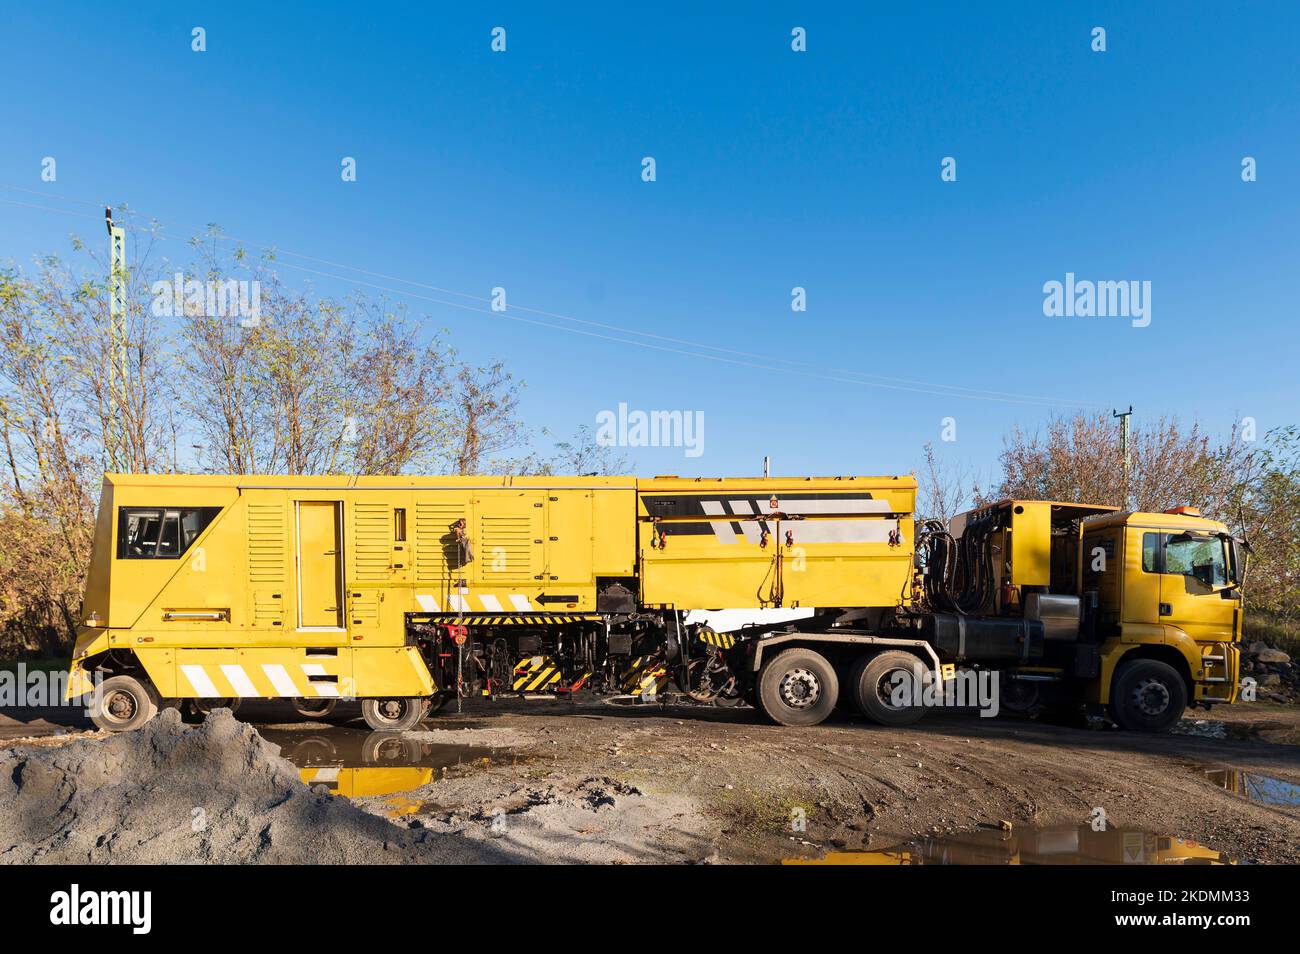 A milling train as a road-rail vehicle , can drive on the road and then work on the track and grind and mill rails Stock Photo